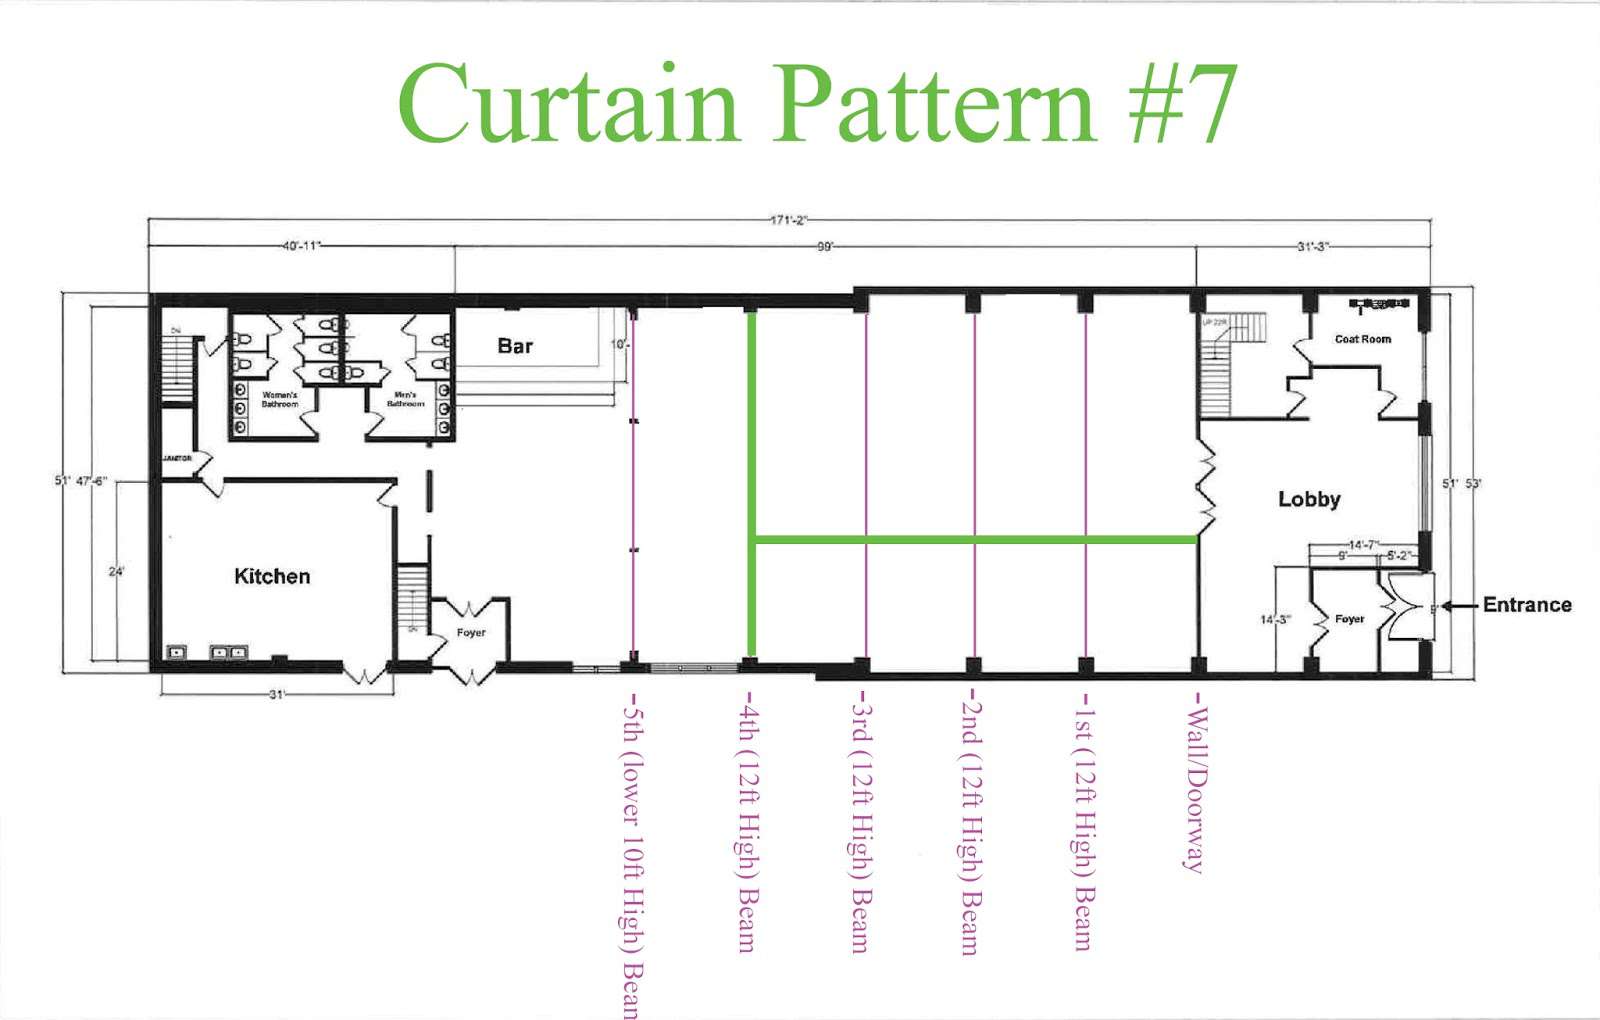 Curtains are hanging across the width of the Main Room at 26 Bridge under the 4th Beam and hanging the length of the room between 4th Bean and Entrance wall on the NON-Bar-Side of The Main Room.